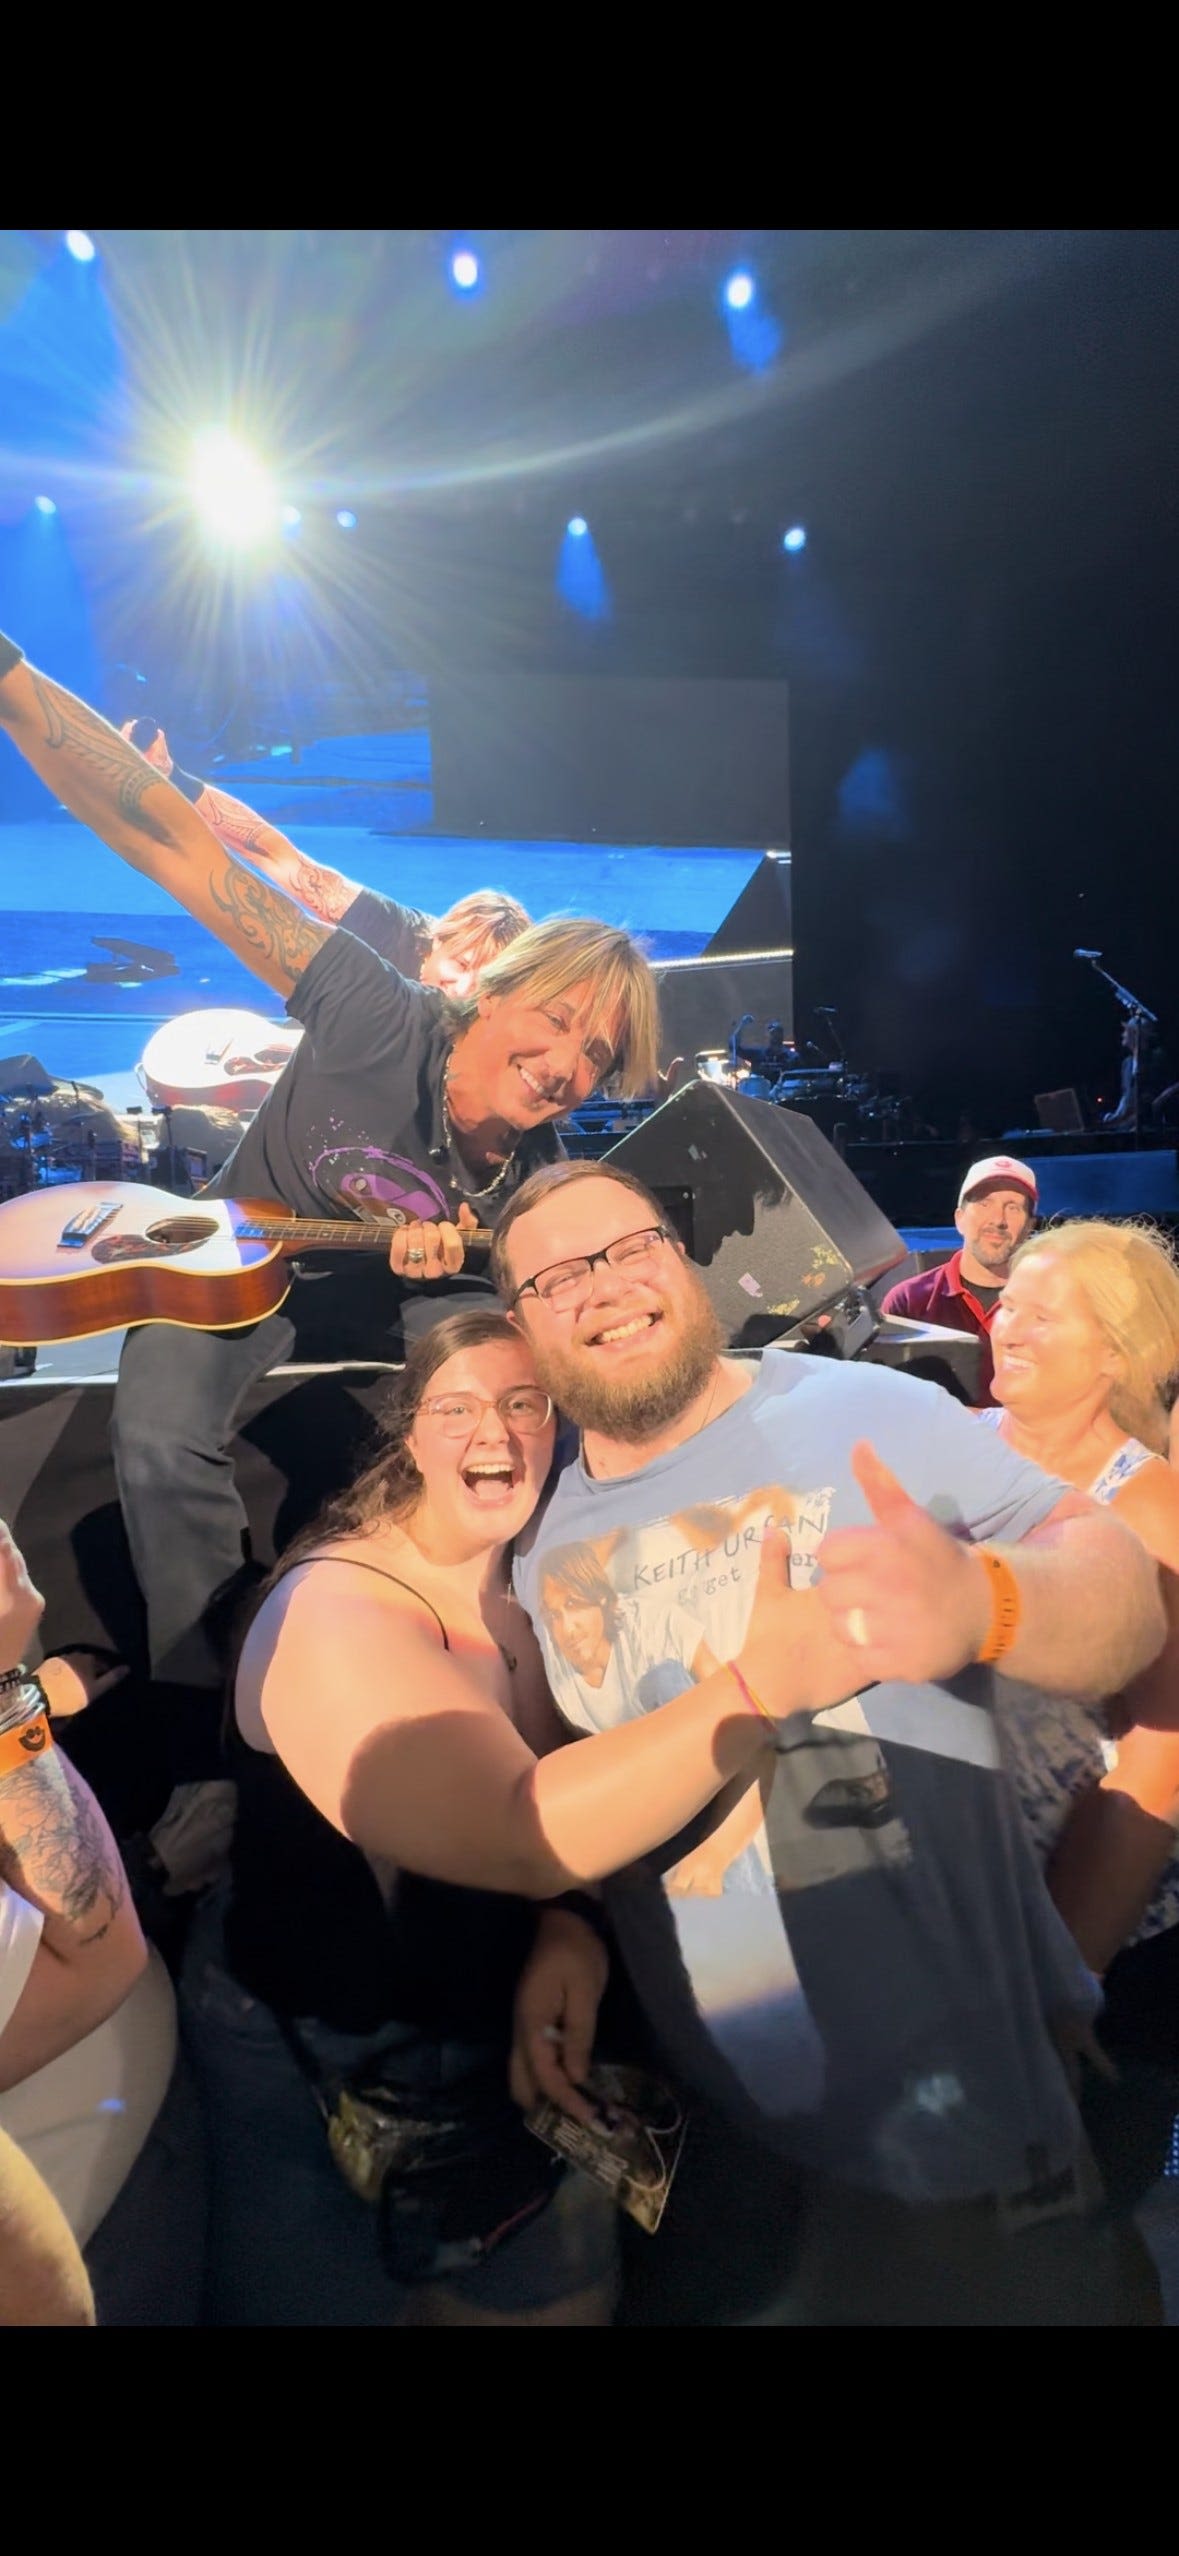 This Milwaukee couple is getting married on Keith Urban's birthday and let him know during his Summerfest show. Here's what happened next.